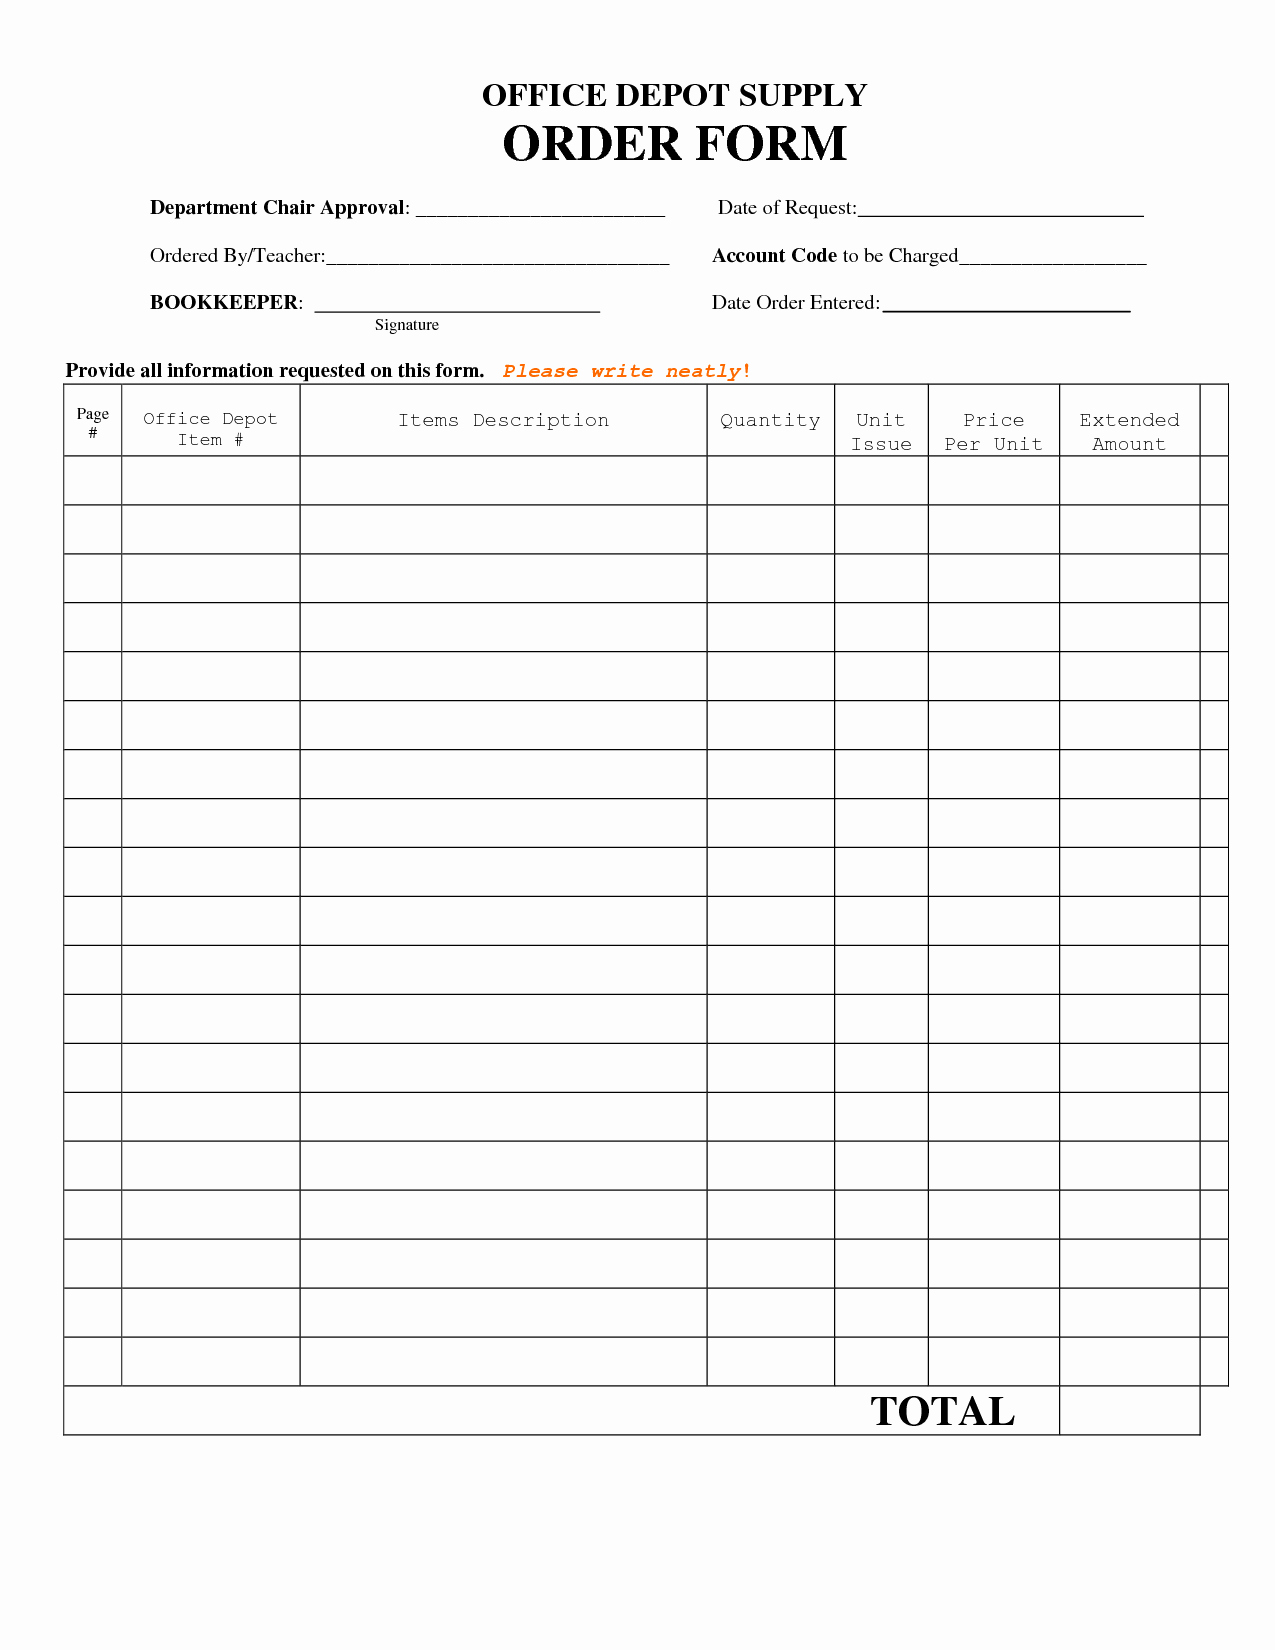 Supply order form Template Luxury Best S Of Standard Fice Supply order form Fice